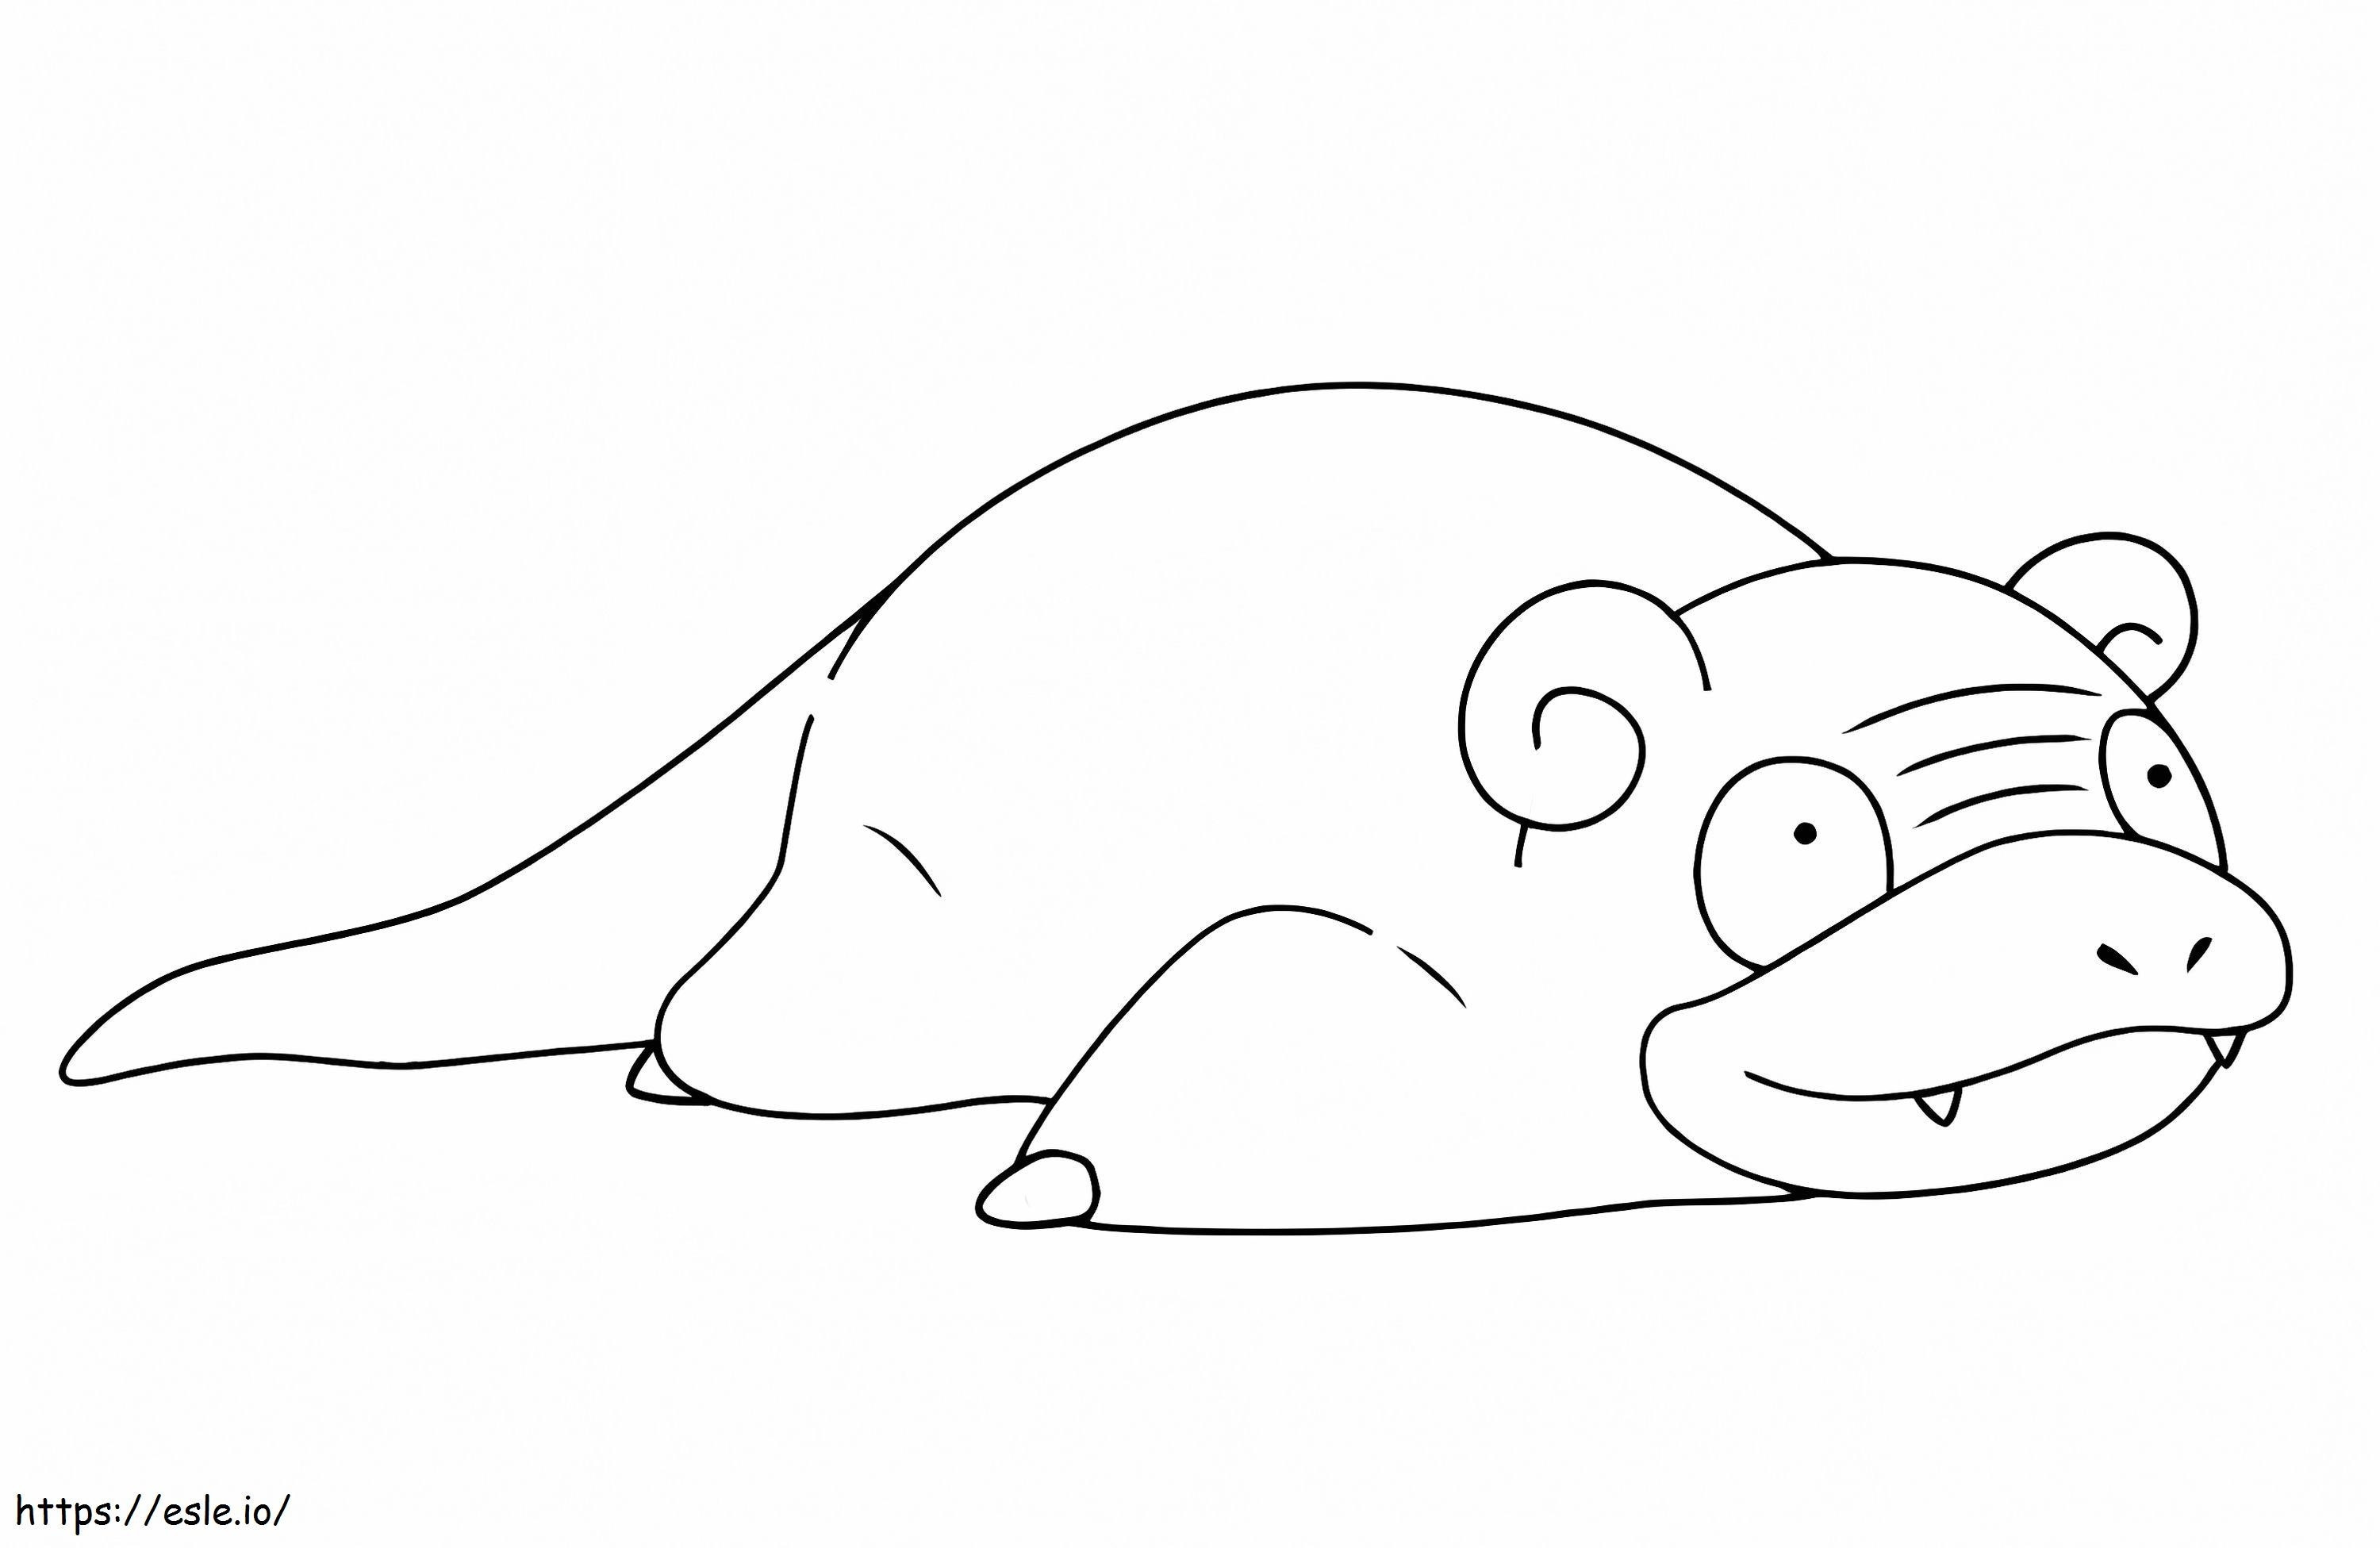 Gallery Slowpoke coloring page